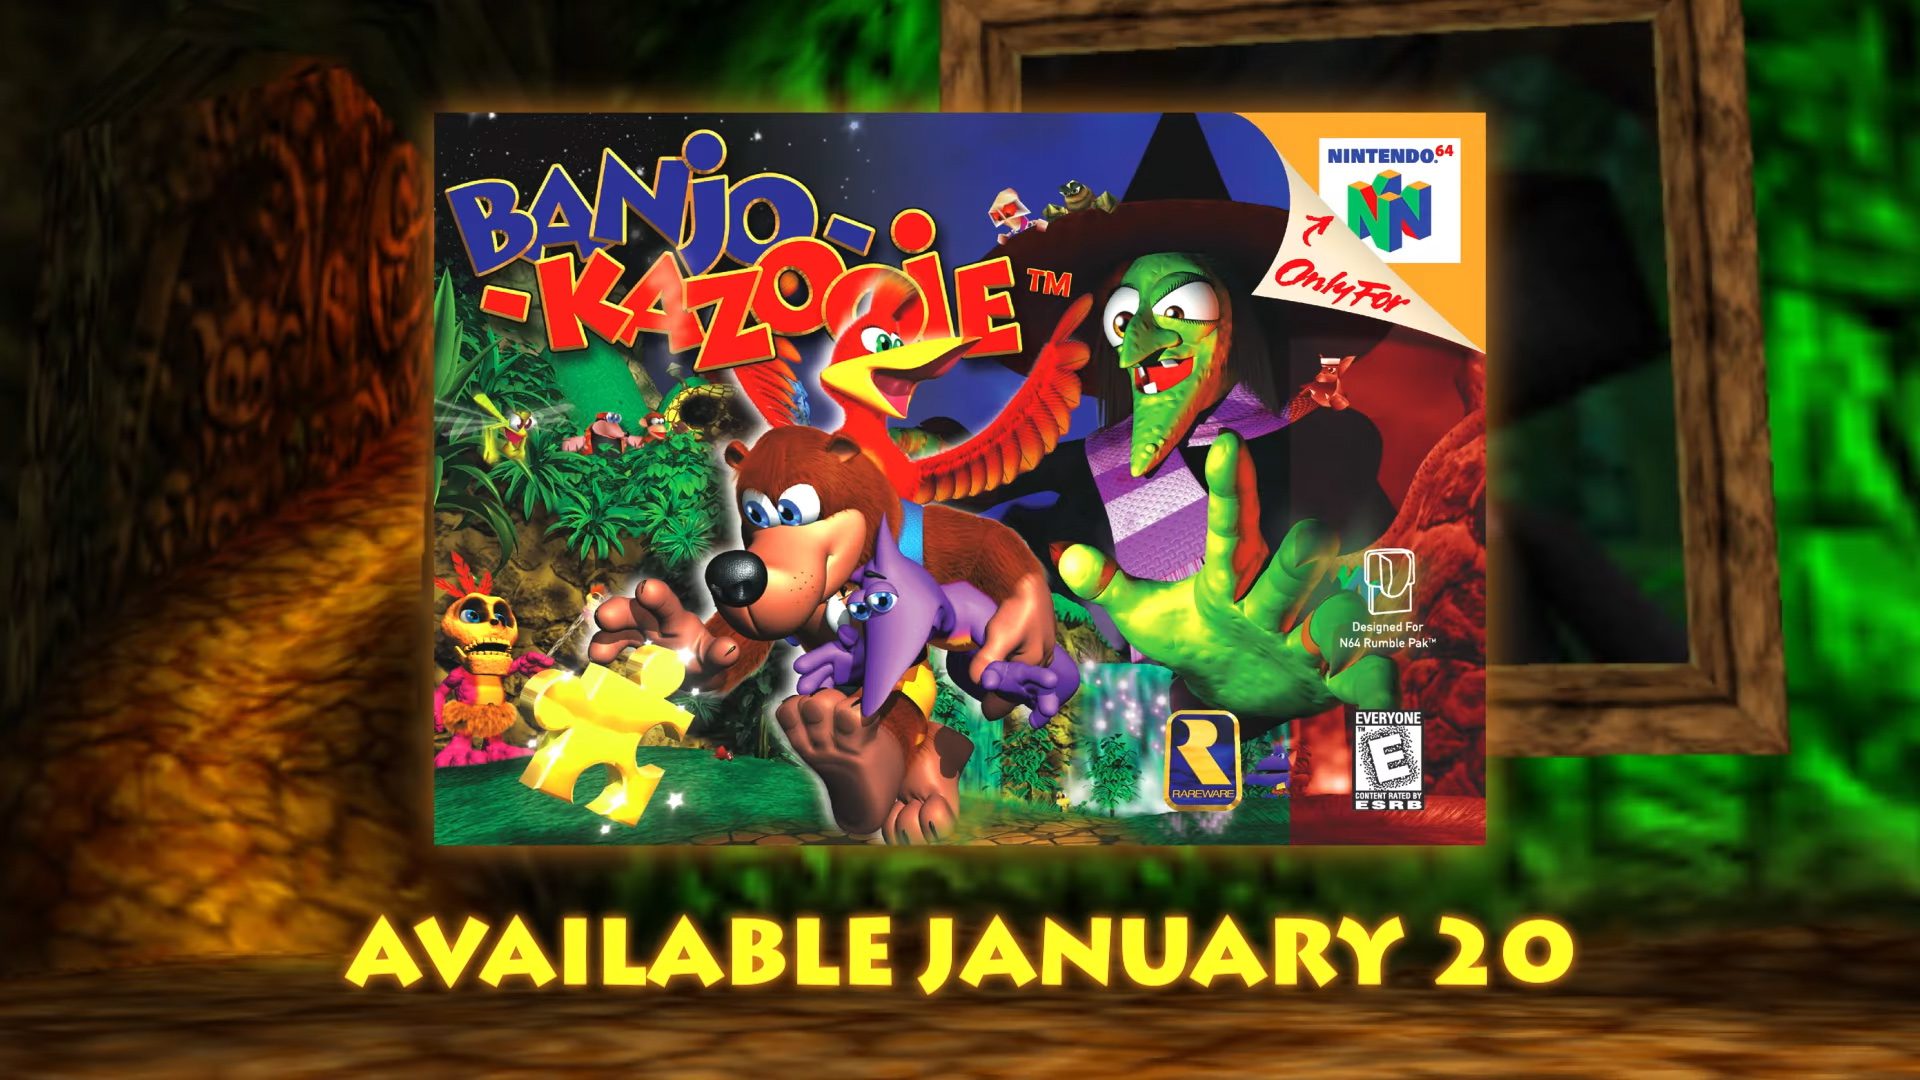 Banjo-Kazooie - Does it hold up?